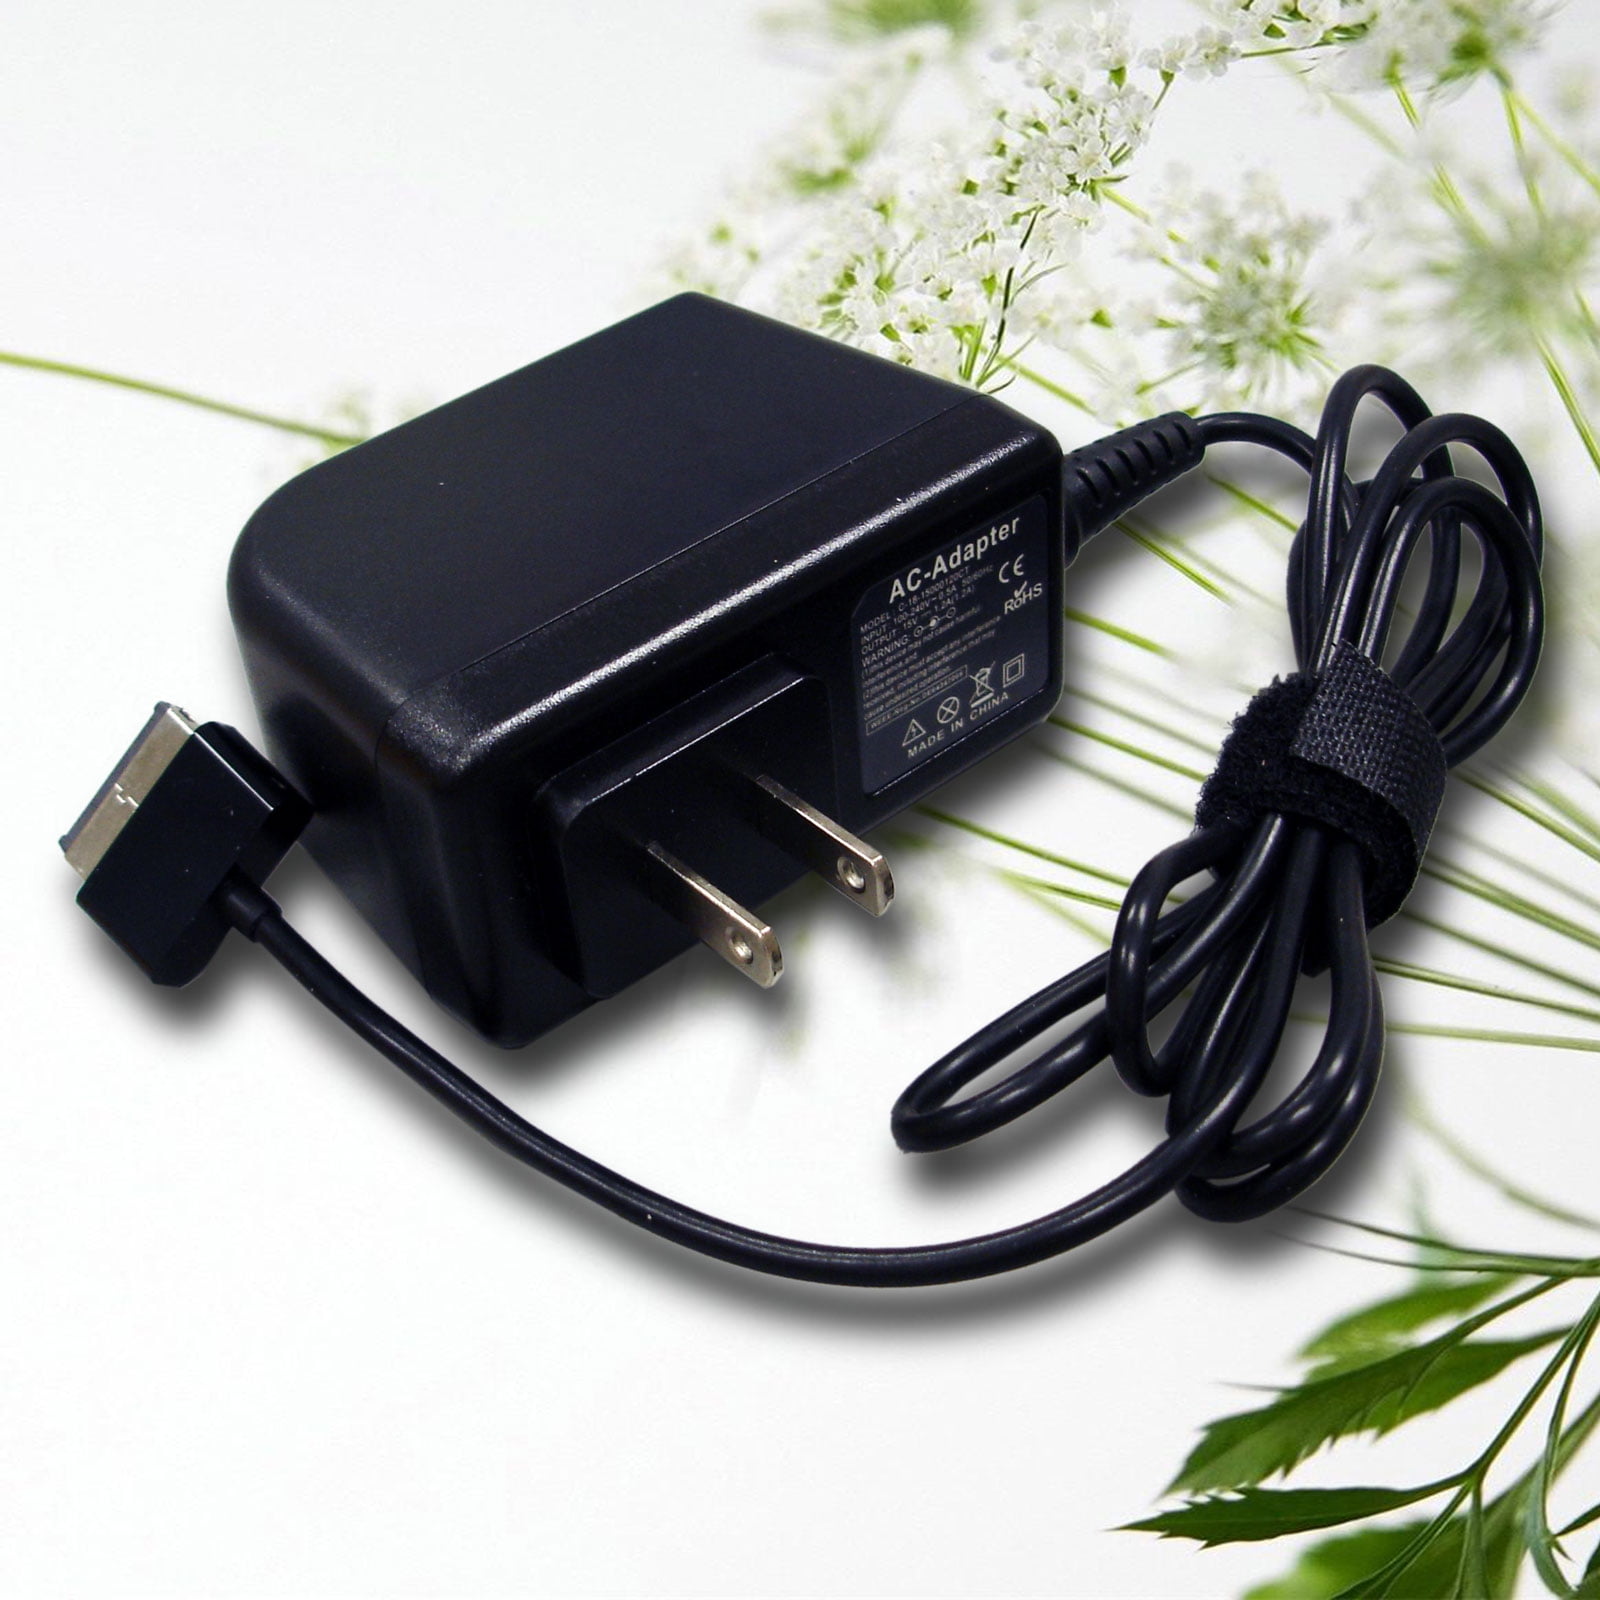 15V 1.2A Charger Power Adapter For Asus Eee Pad Transformer TF201 TF300 TF700 